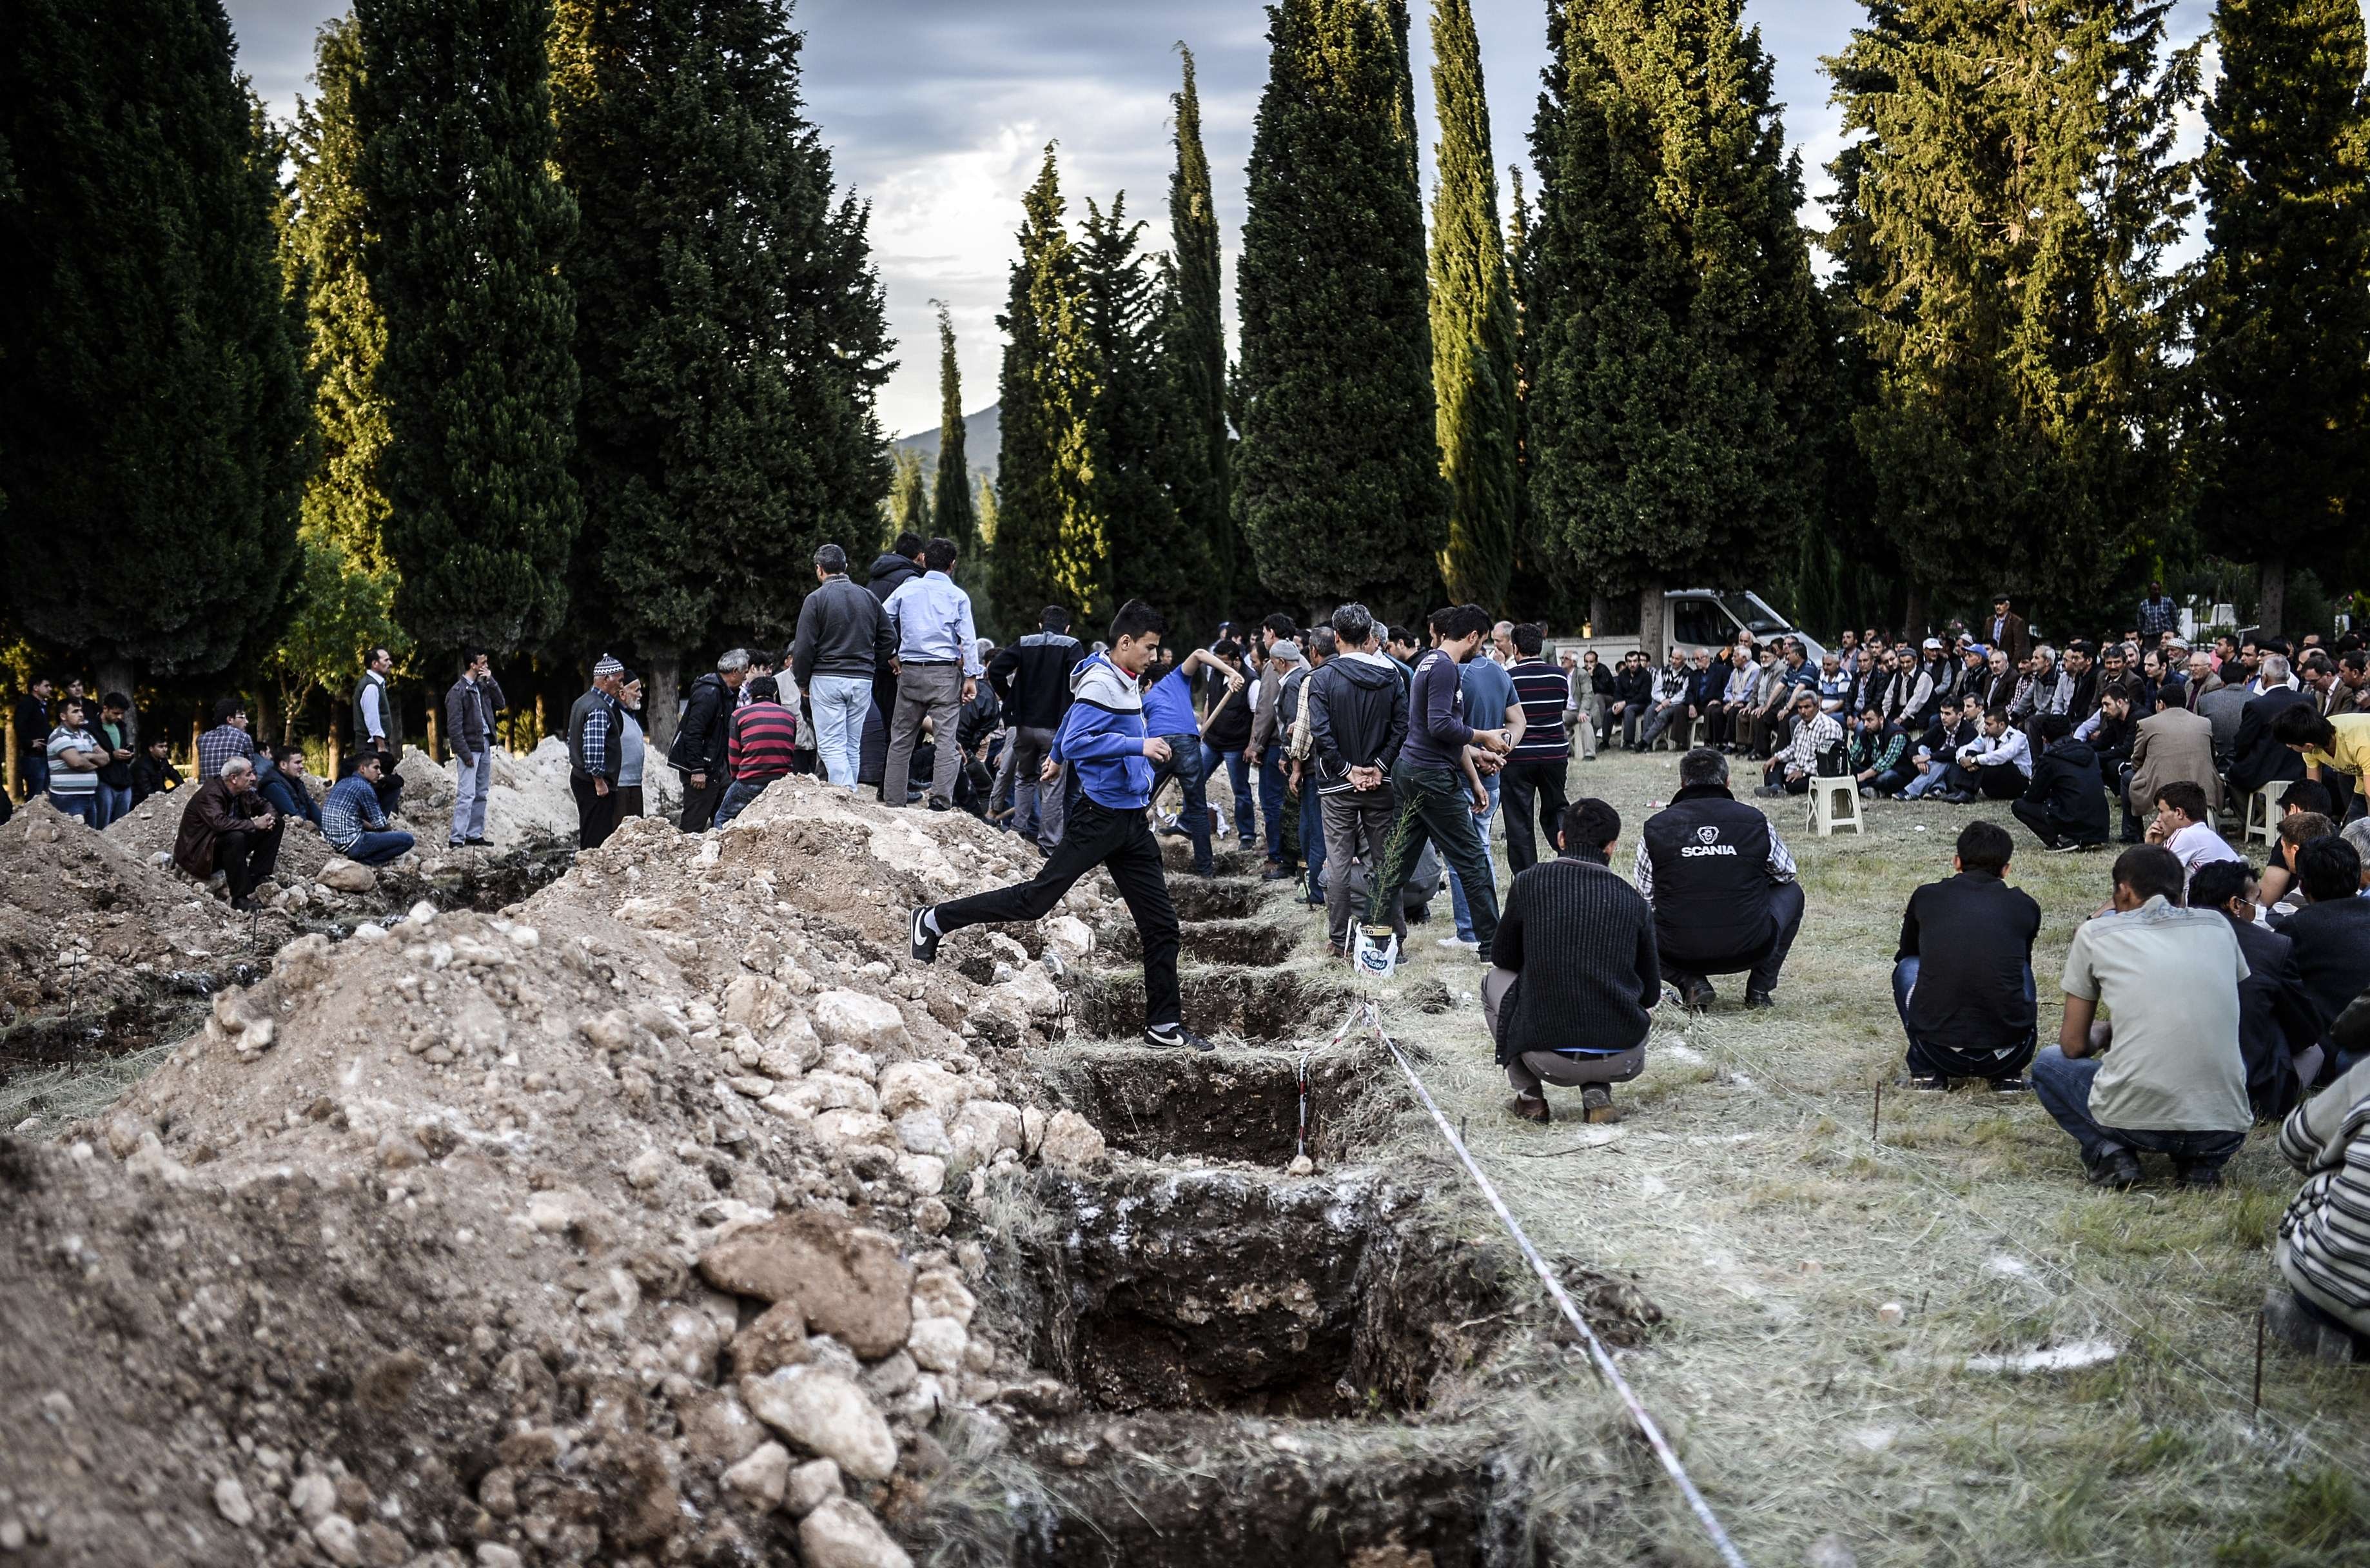 People sit near graves in a cemetary in Manisa on May 14, 2014, dug for the funeral of miners killed in a mine blast the day before in the western Turkish province of Manisa.